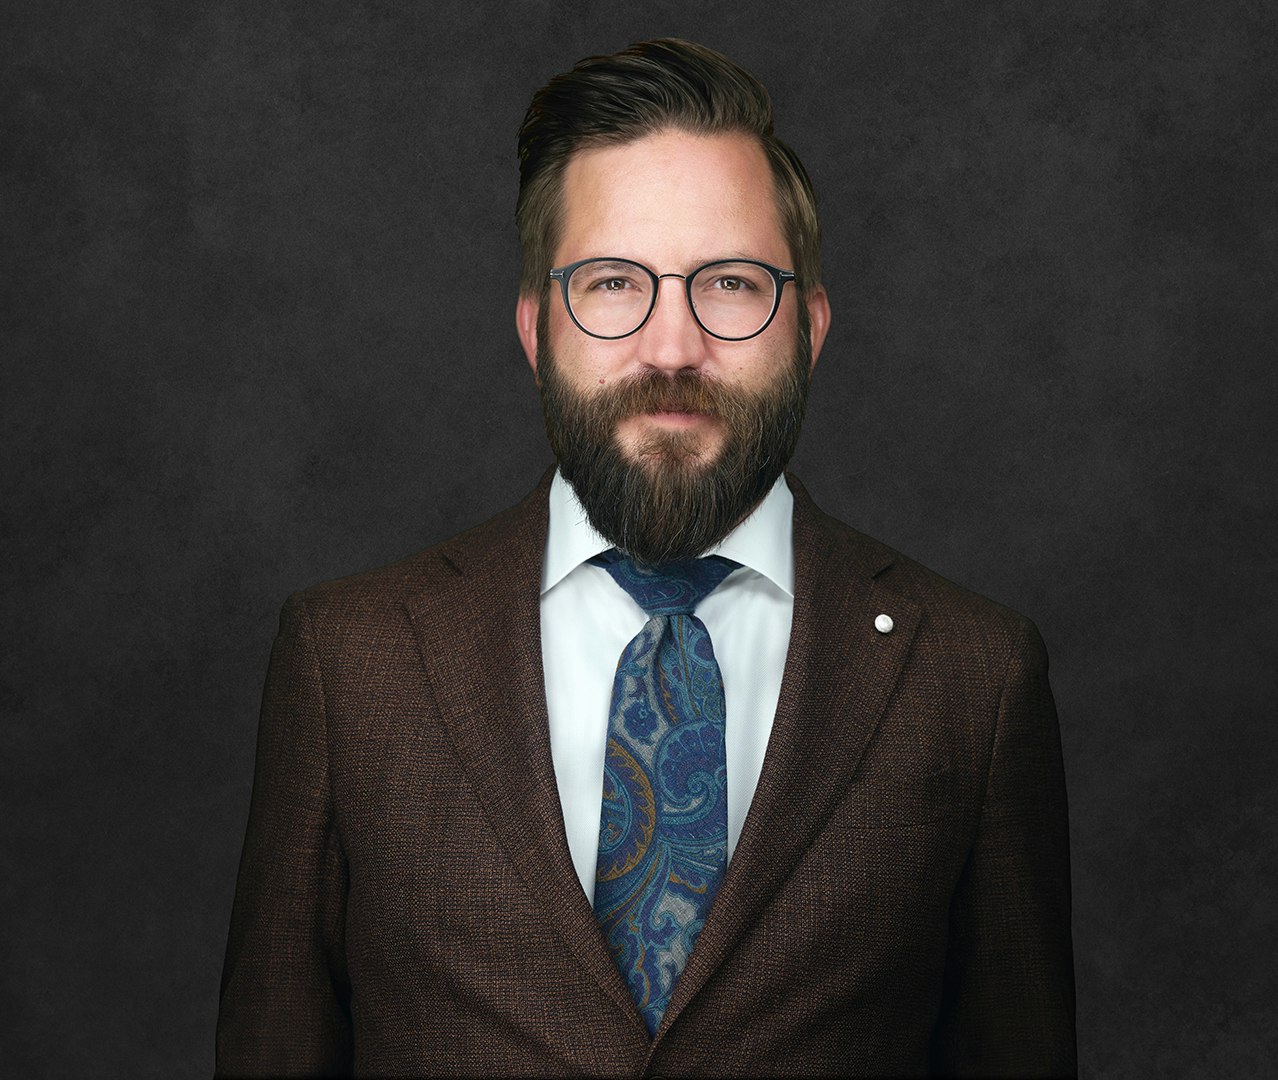 Phil Abram smiling, wearing glasses, a beard, a suit, white shirt and blue and green patterned tie